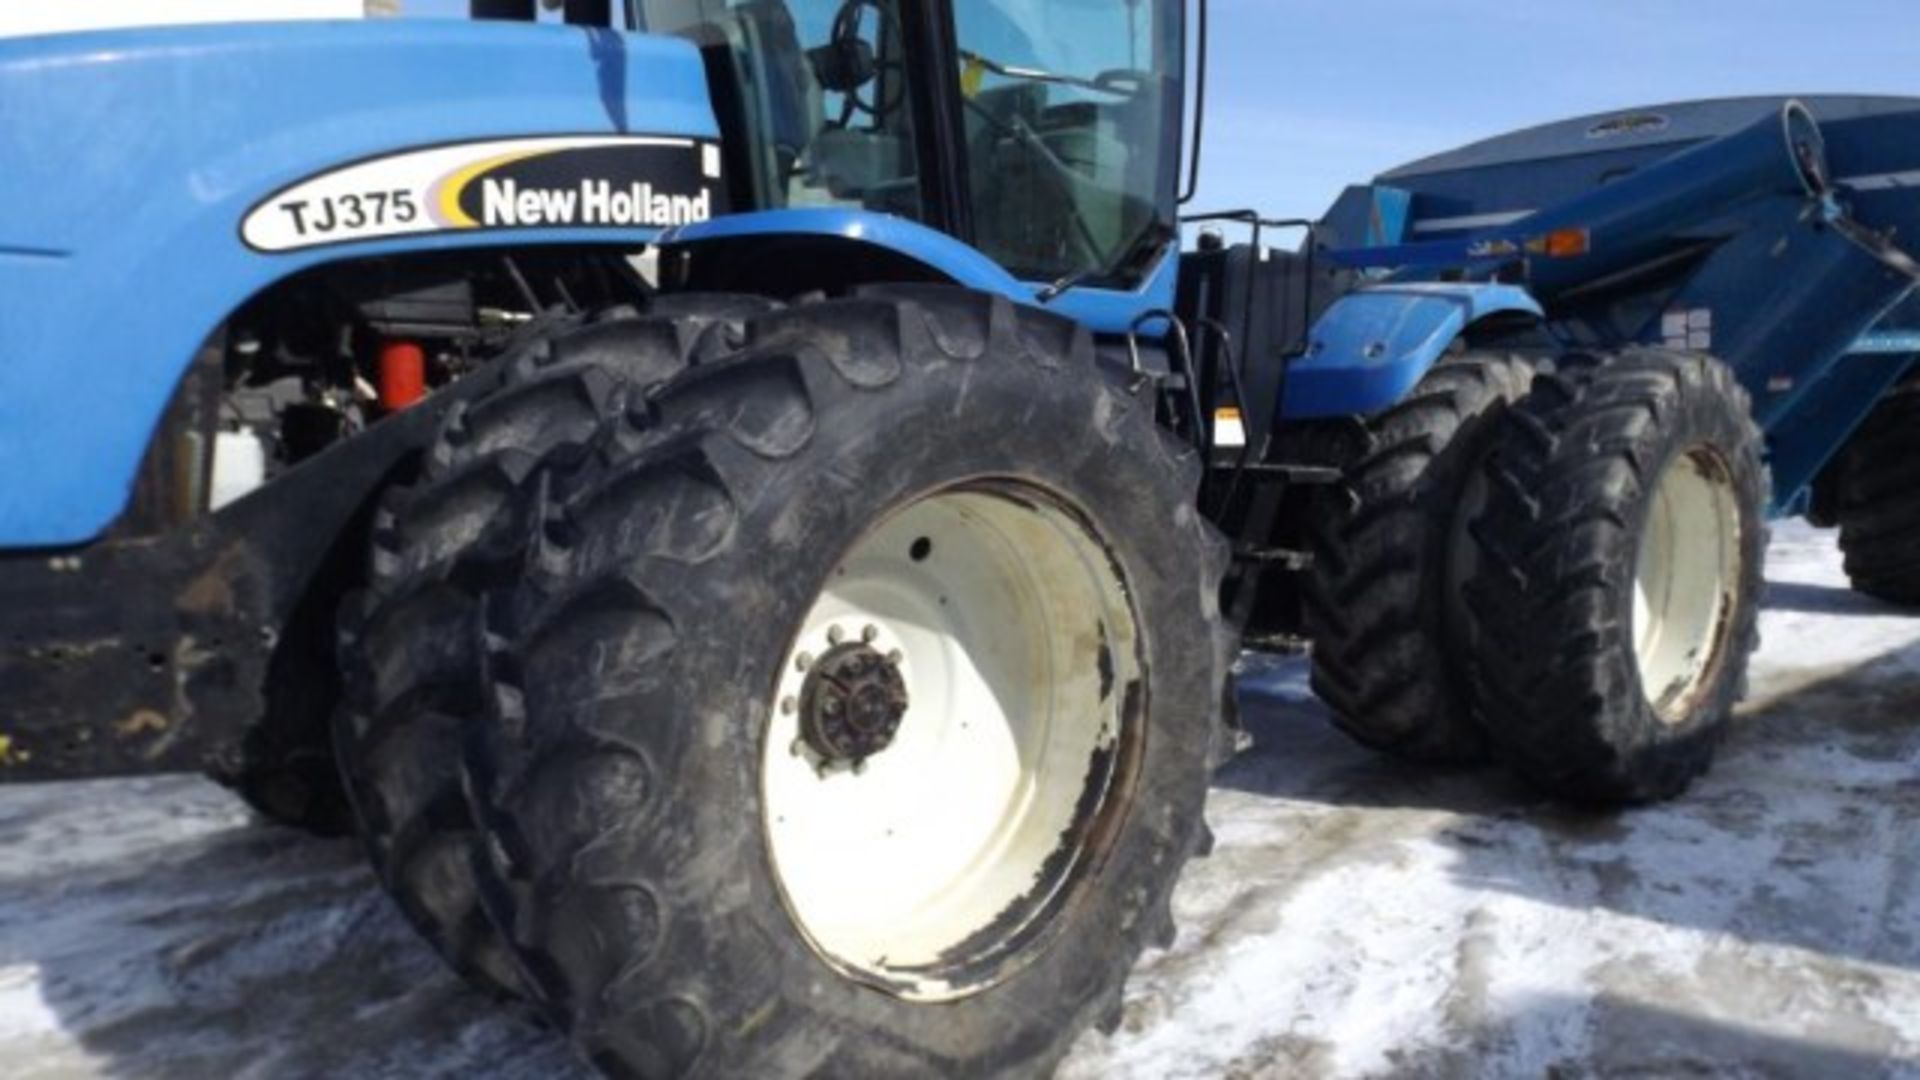 New Holland TJ375 Tractor '03, sn# RVS002016 7683 Hrs, 4WD, Fully Equipped Cab, 375 HP, 16/2 PS, - Image 5 of 24